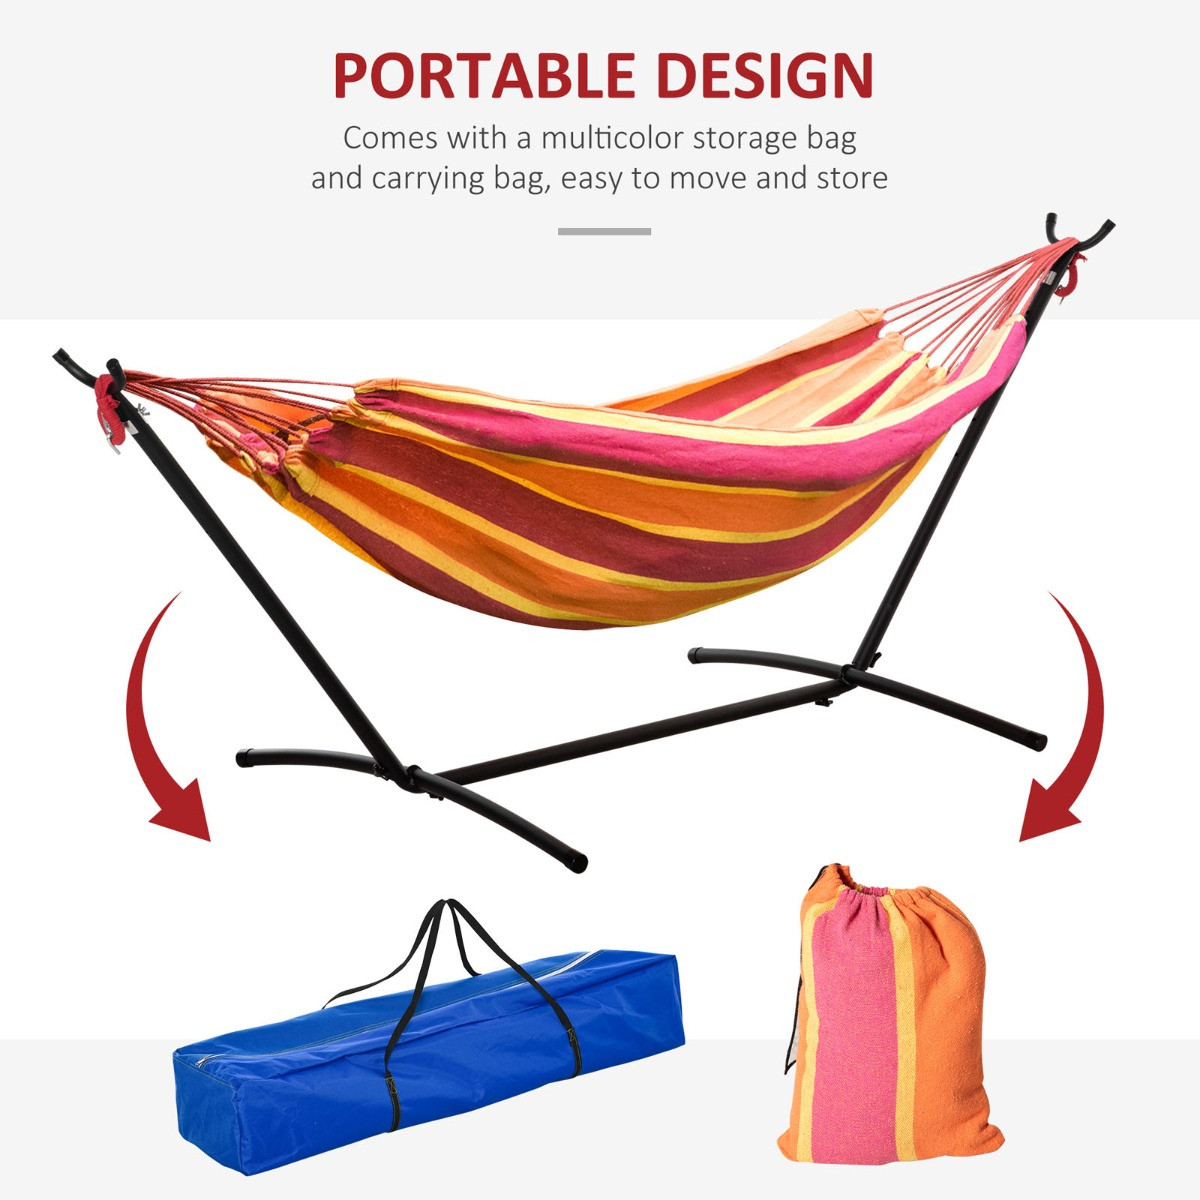 Outsunny Hammock With Stand, Red - 294 x 117 cm>